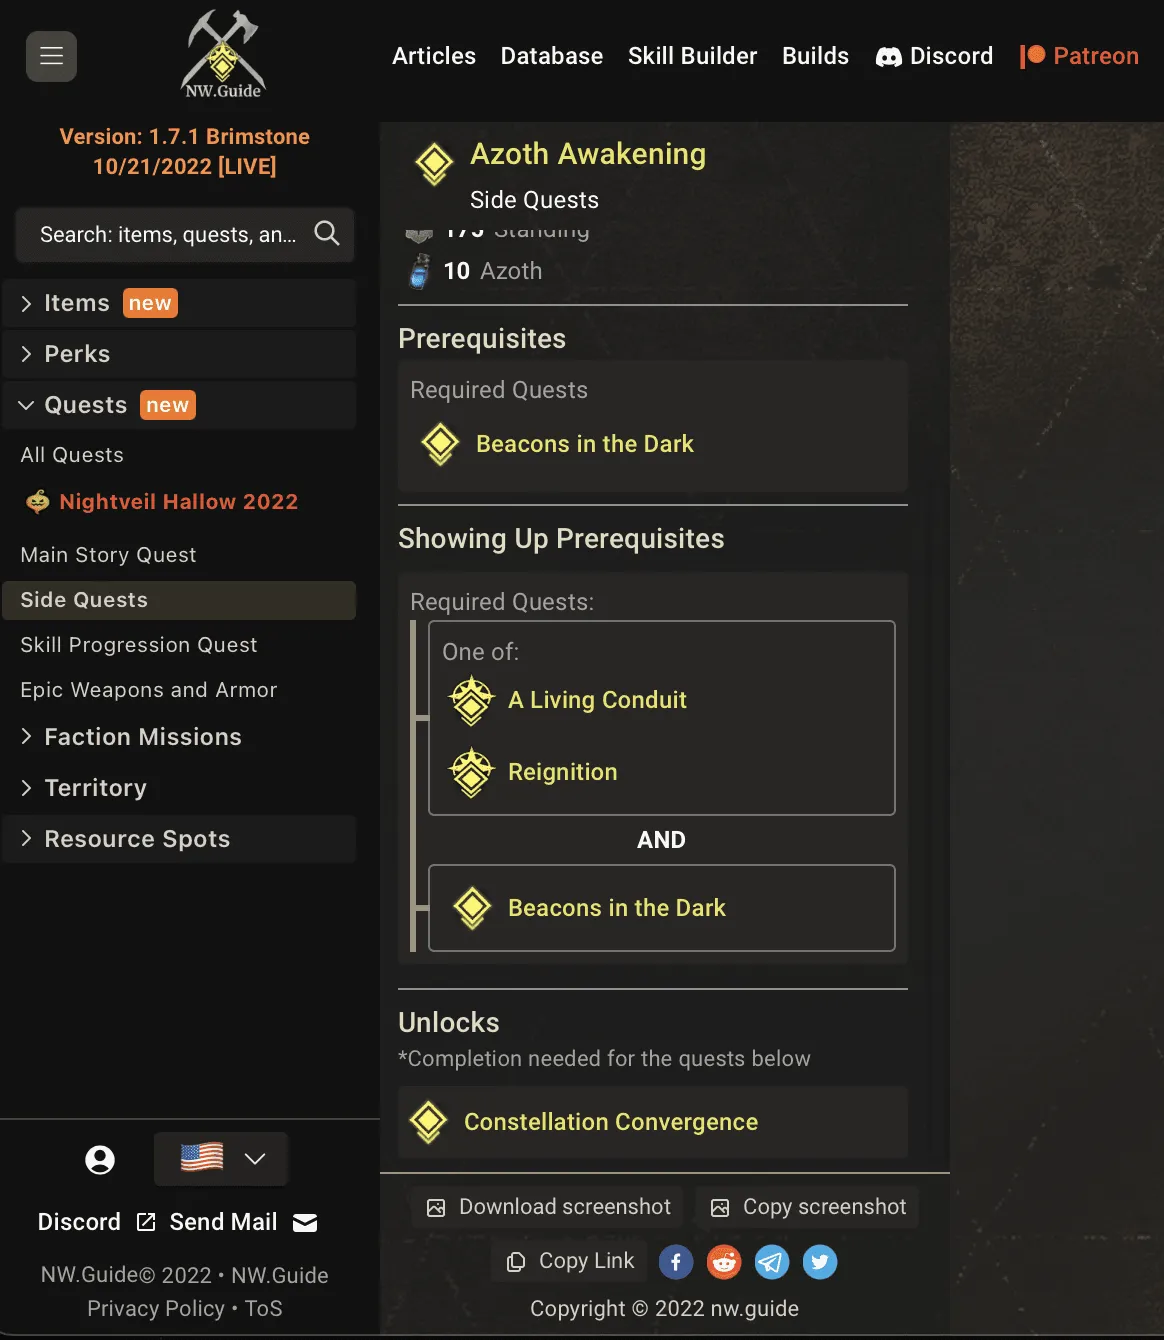 New World Quest Start requirements, show up requirements, and unlocked quests upon completion